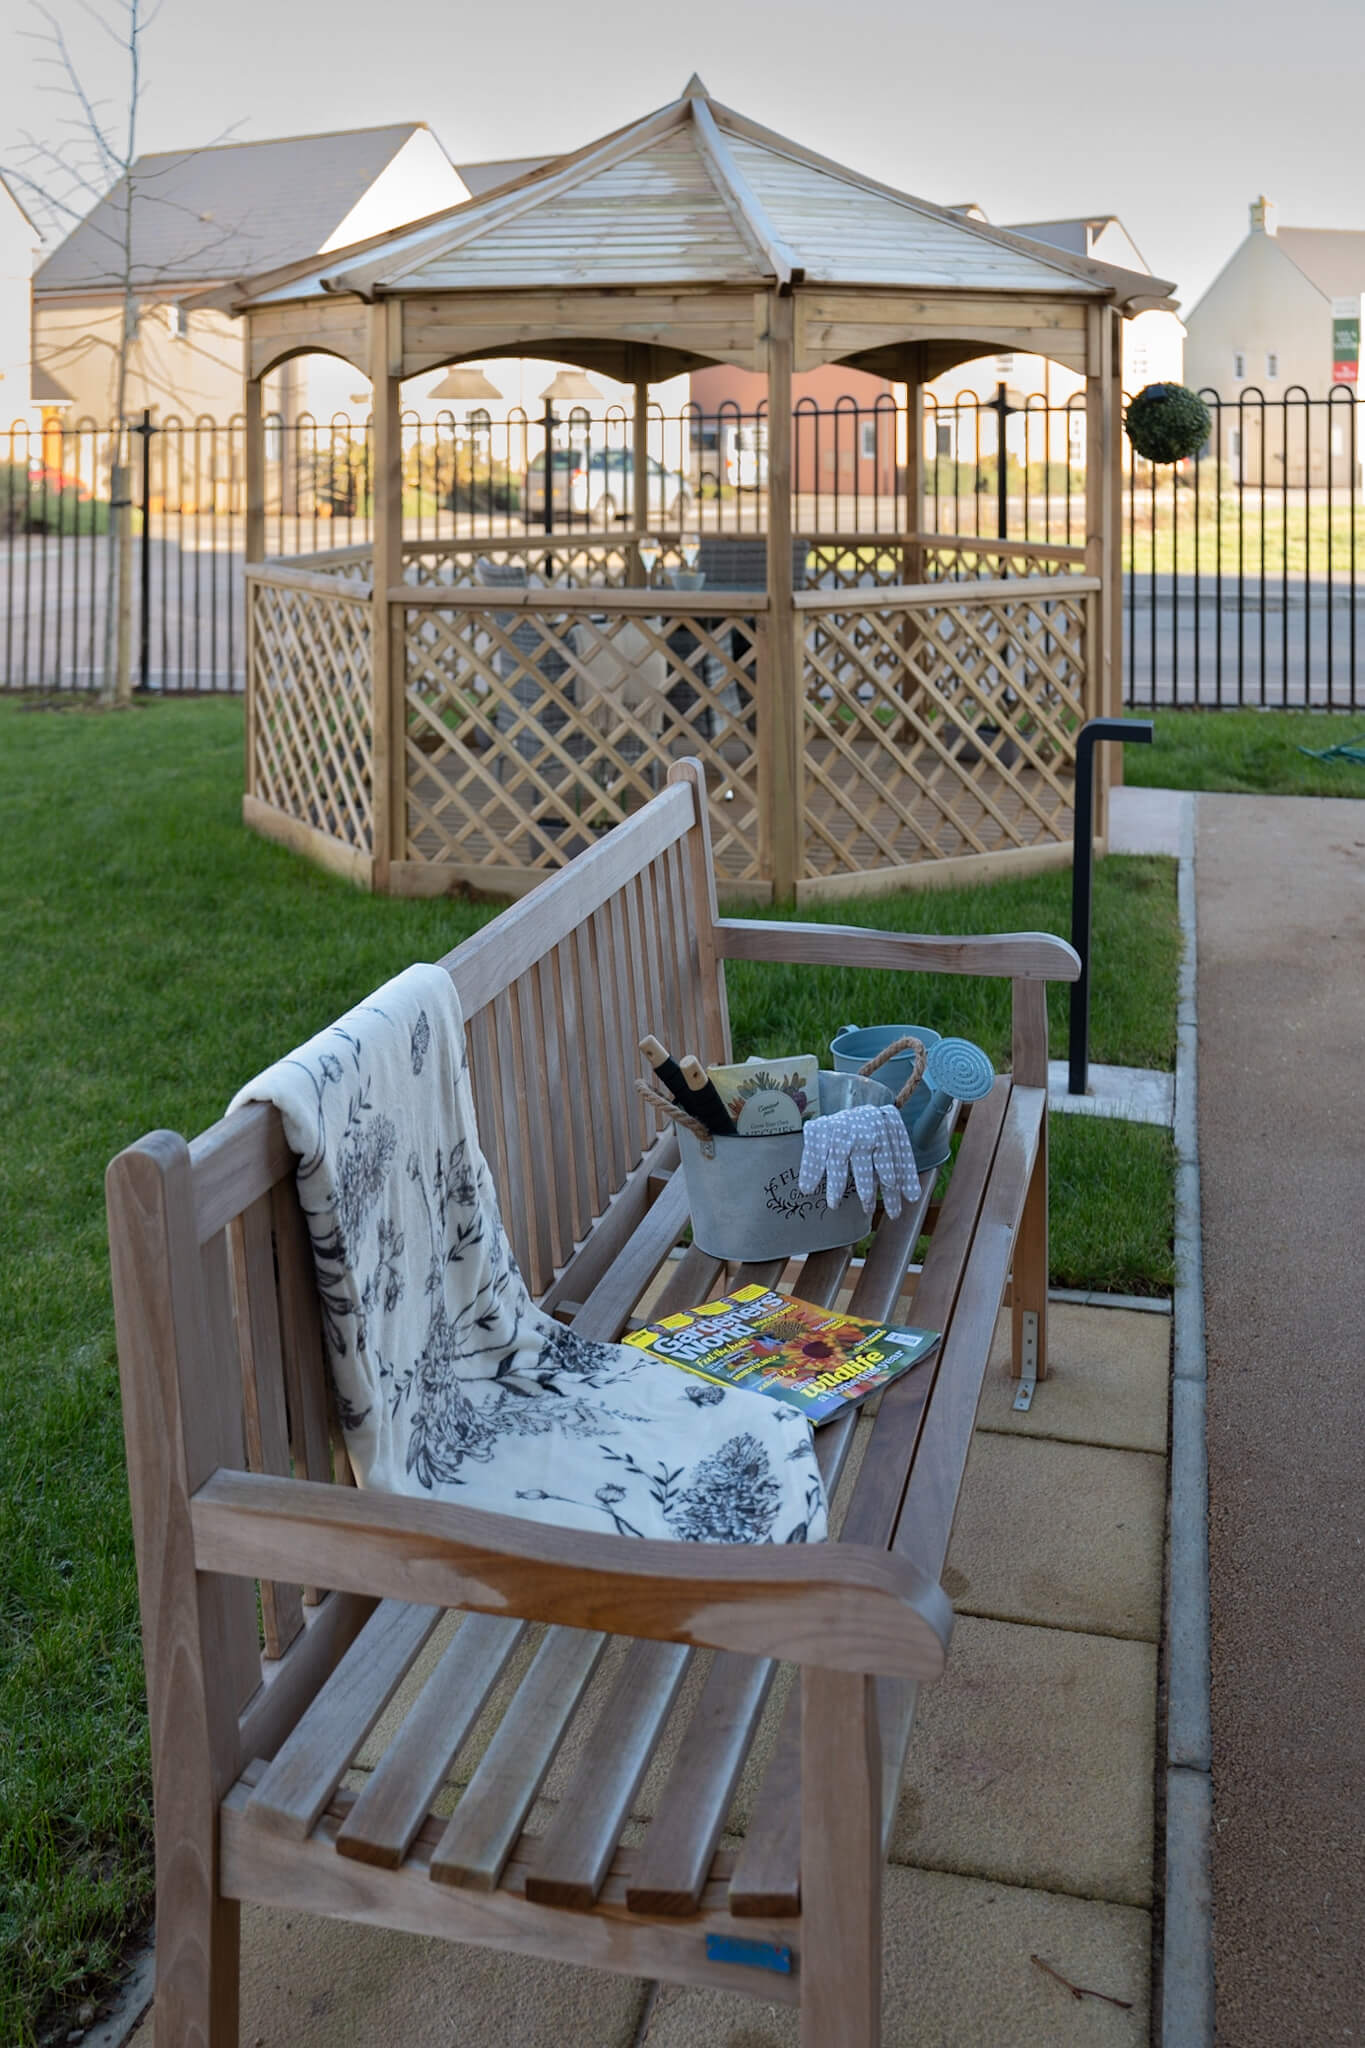 Pergola in background. Garden seating with blanket and gardening tools on top.